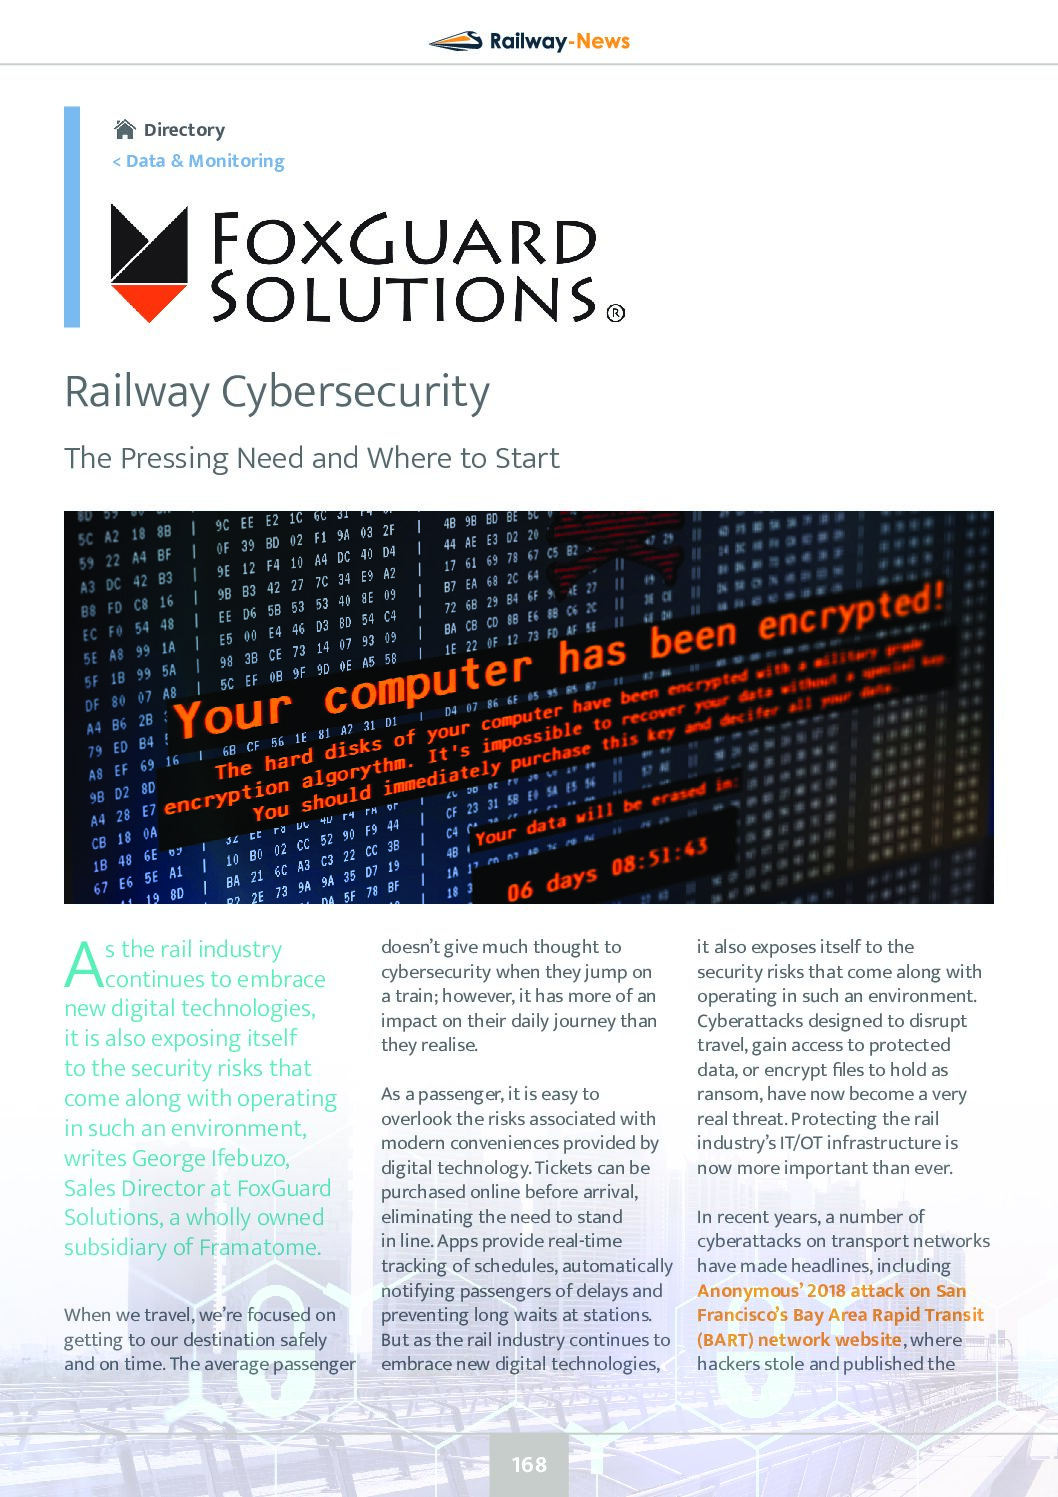 Railway Cybersecurity – The Pressing Need and Where to Start